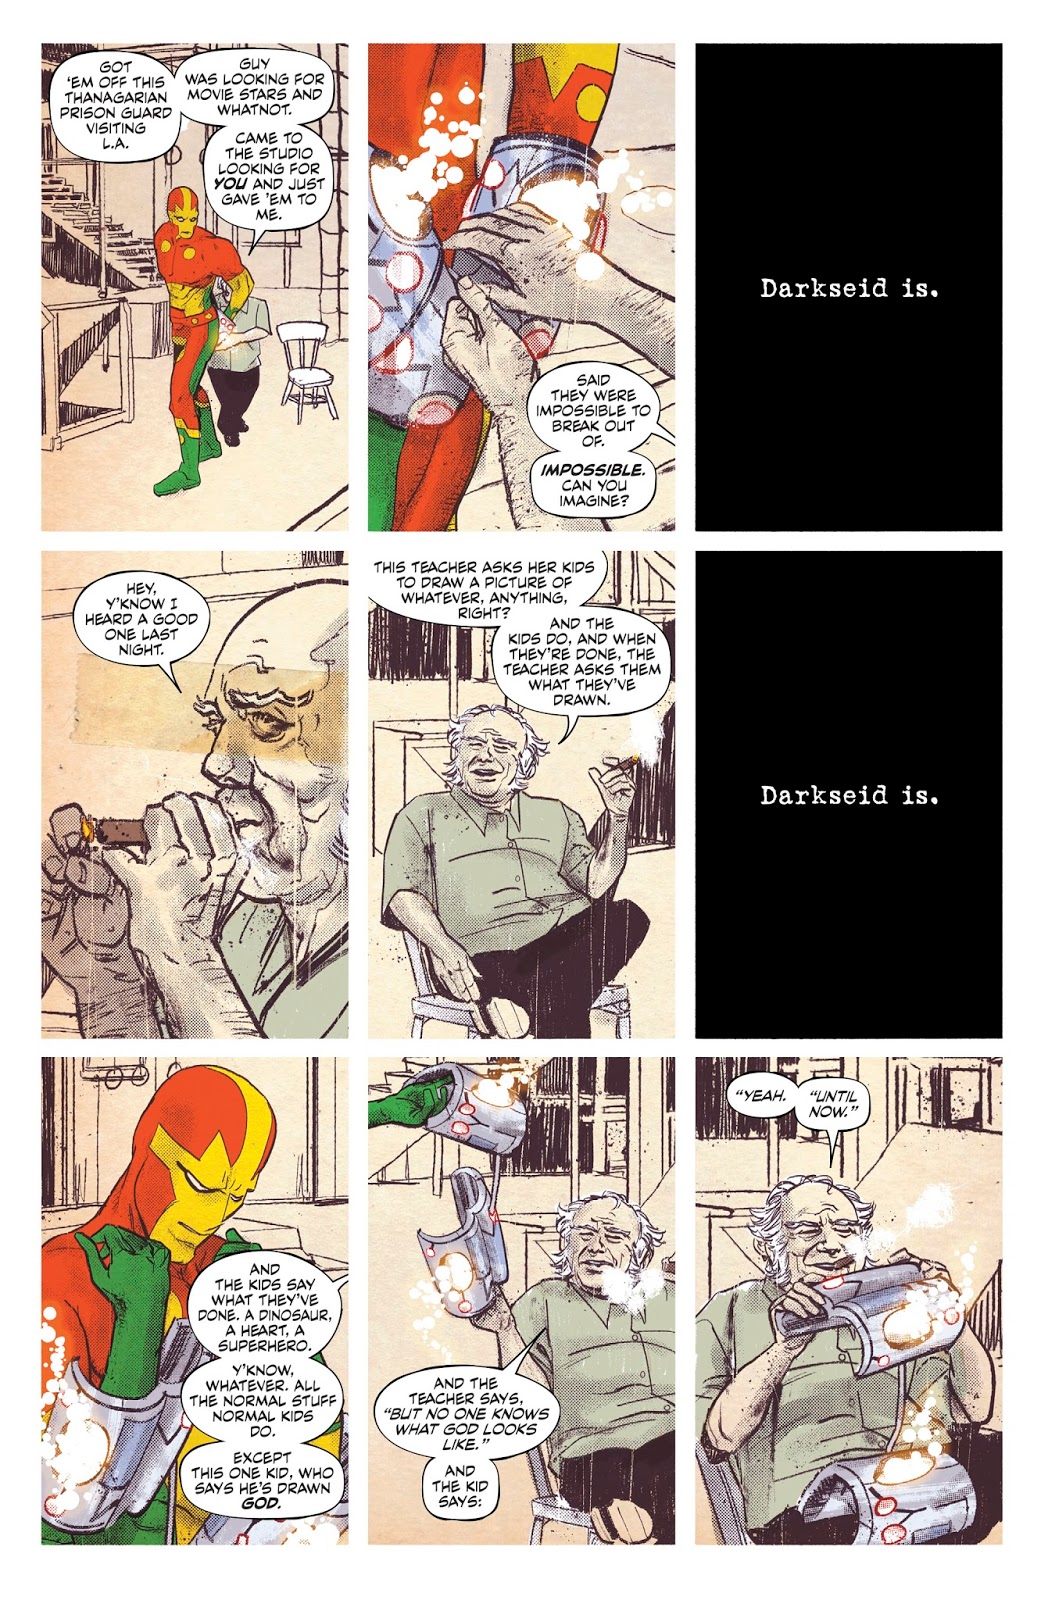 Mister Miracle review